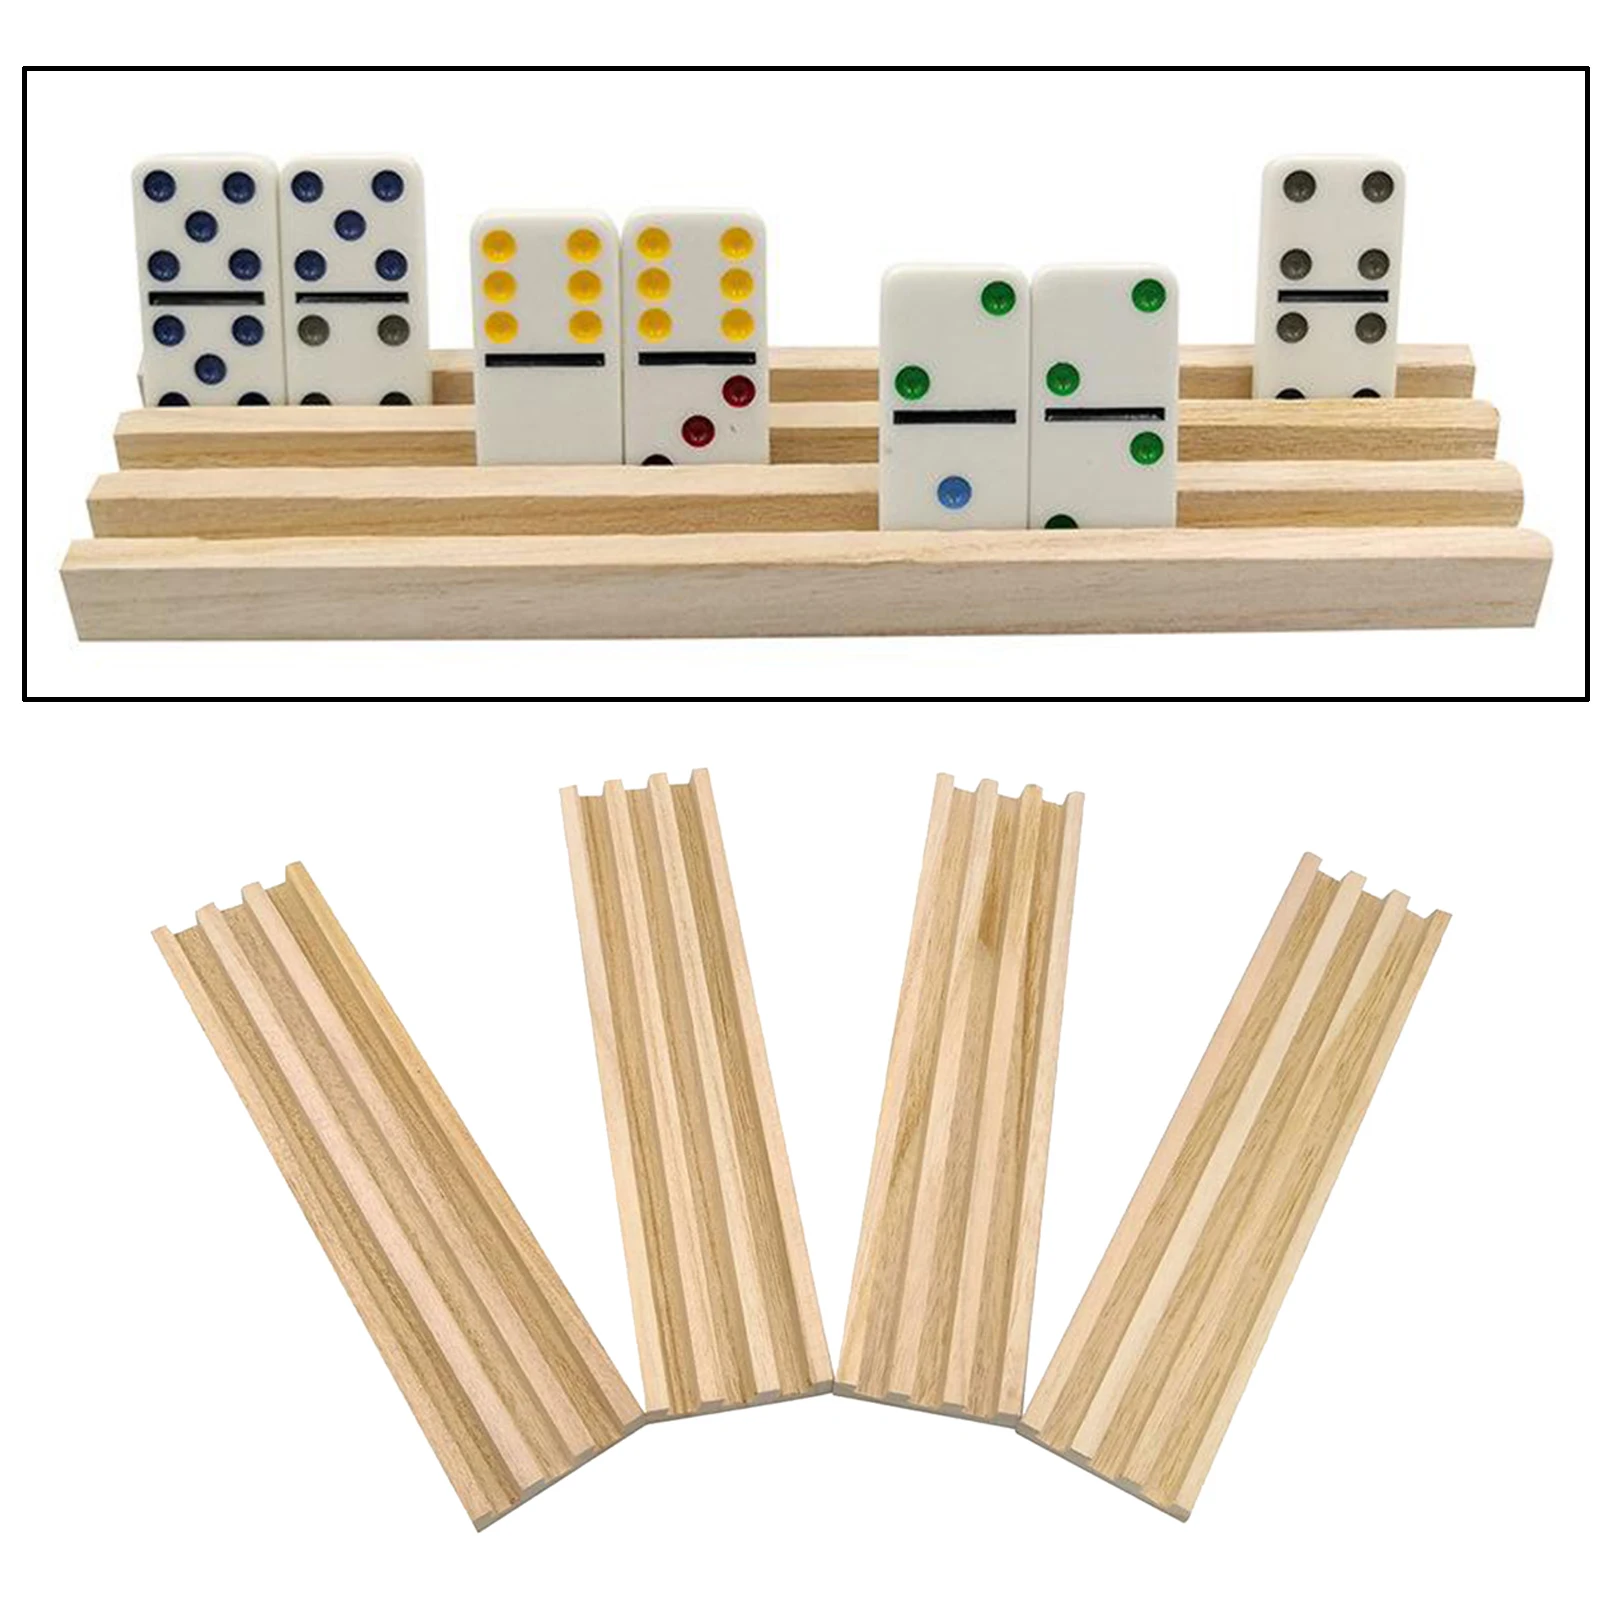 Set of 4 Wooden Domino & Playing Card Racks Trays Holders Organizer 